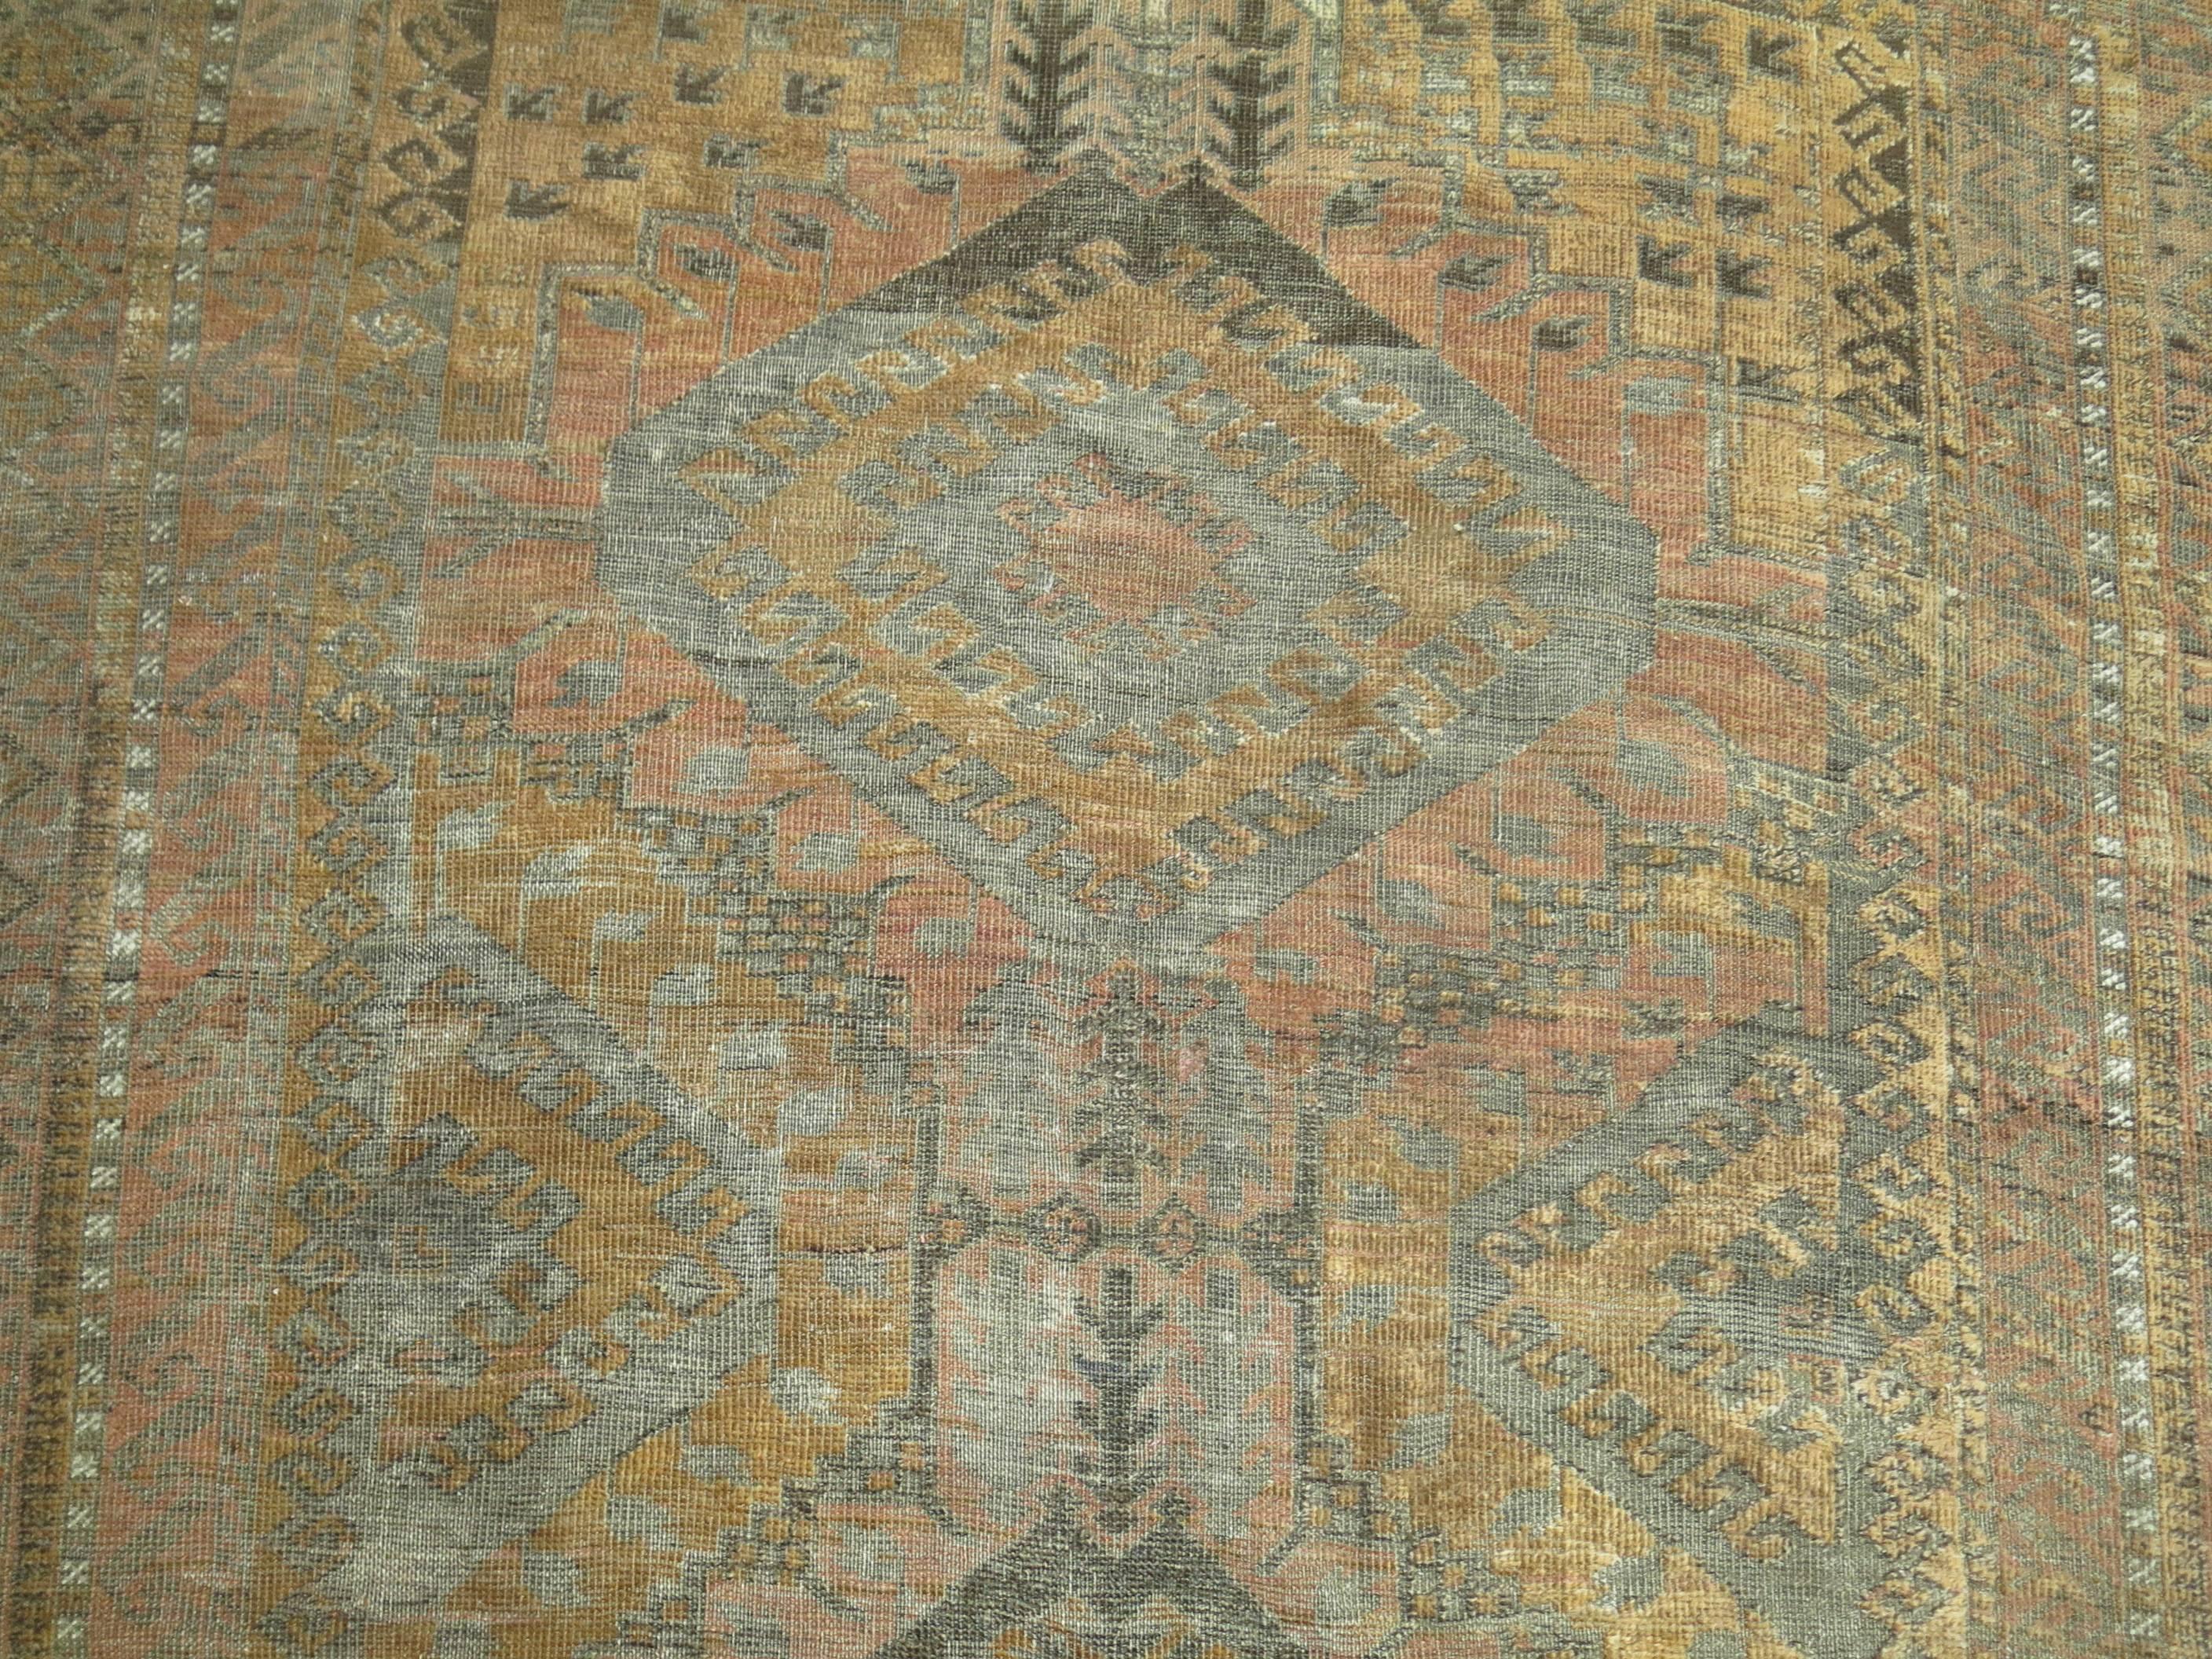 Pale brown, copper and caramel color Persian Balouch carpet from the early 20th century.

Measures: 5'7